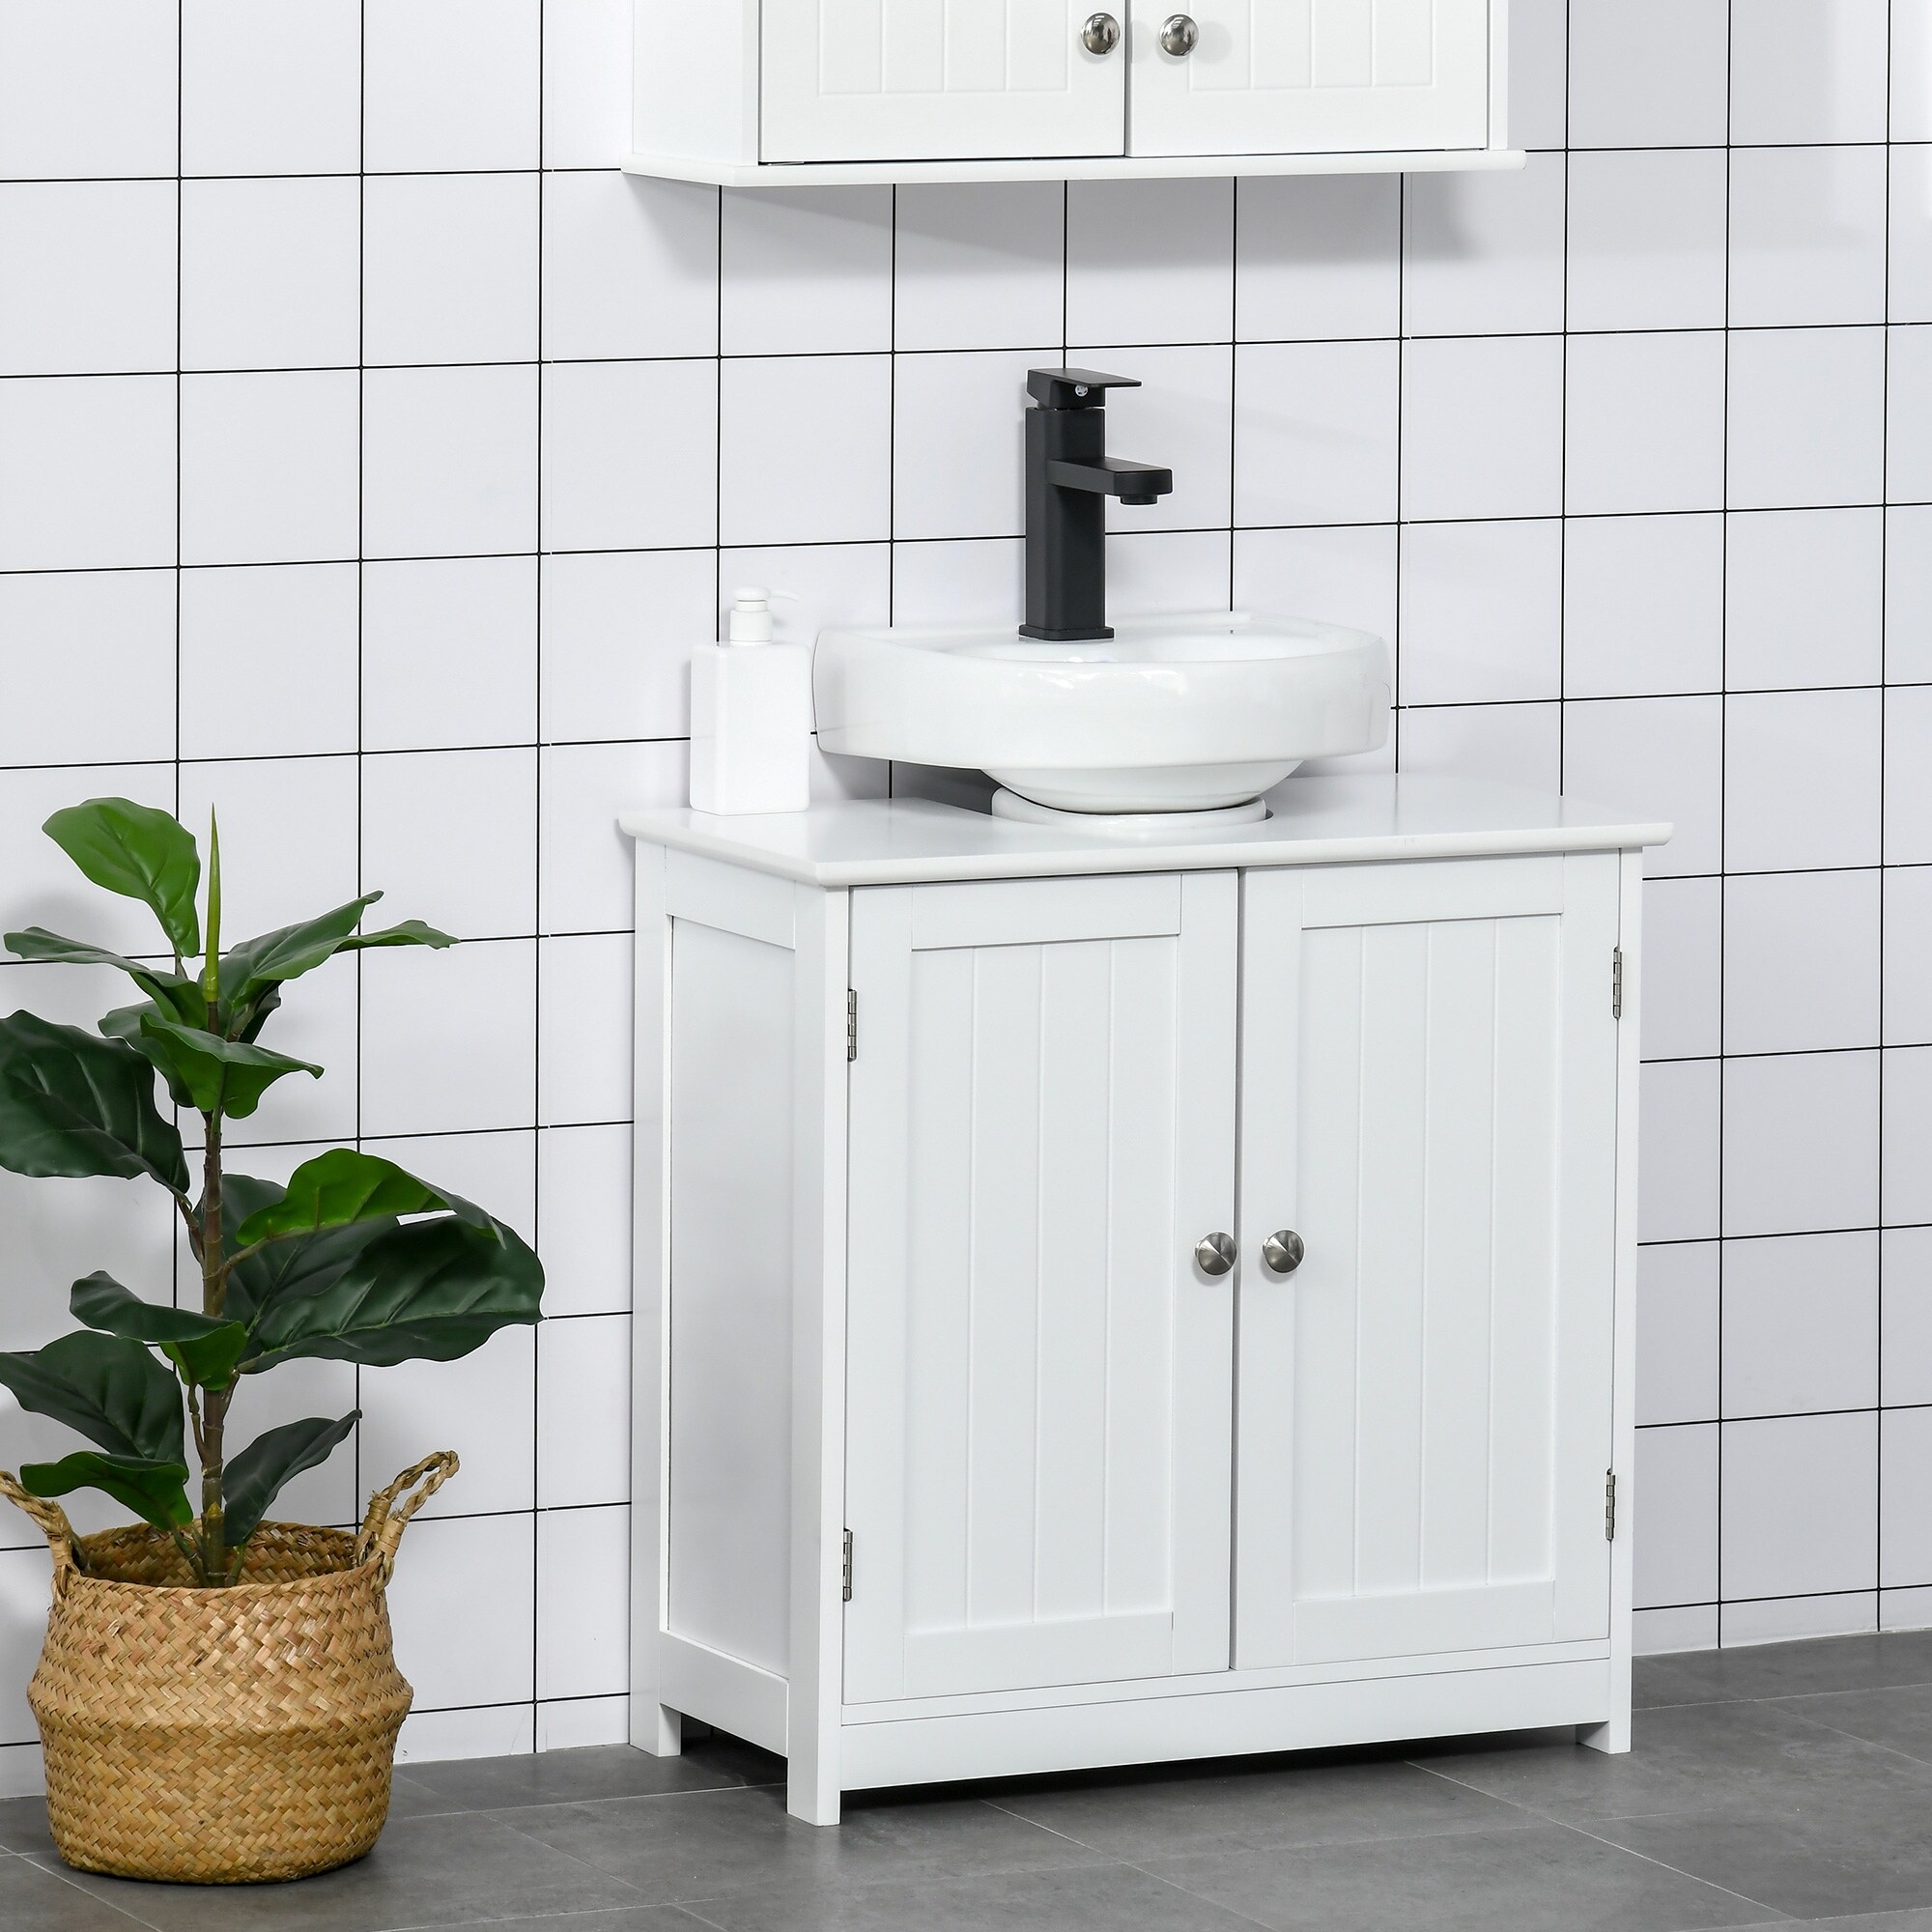 https://ak1.ostkcdn.com/images/products/is/images/direct/f356200423e77f7e632c6217338e28dd2e3e8974/kleankin-Vanity-Base-Cabinet%2C-Under-Sink-Bathroom-Cabinet-Storage-with-U-Shape-Cut-Out%2C-White-and-Grey.jpg